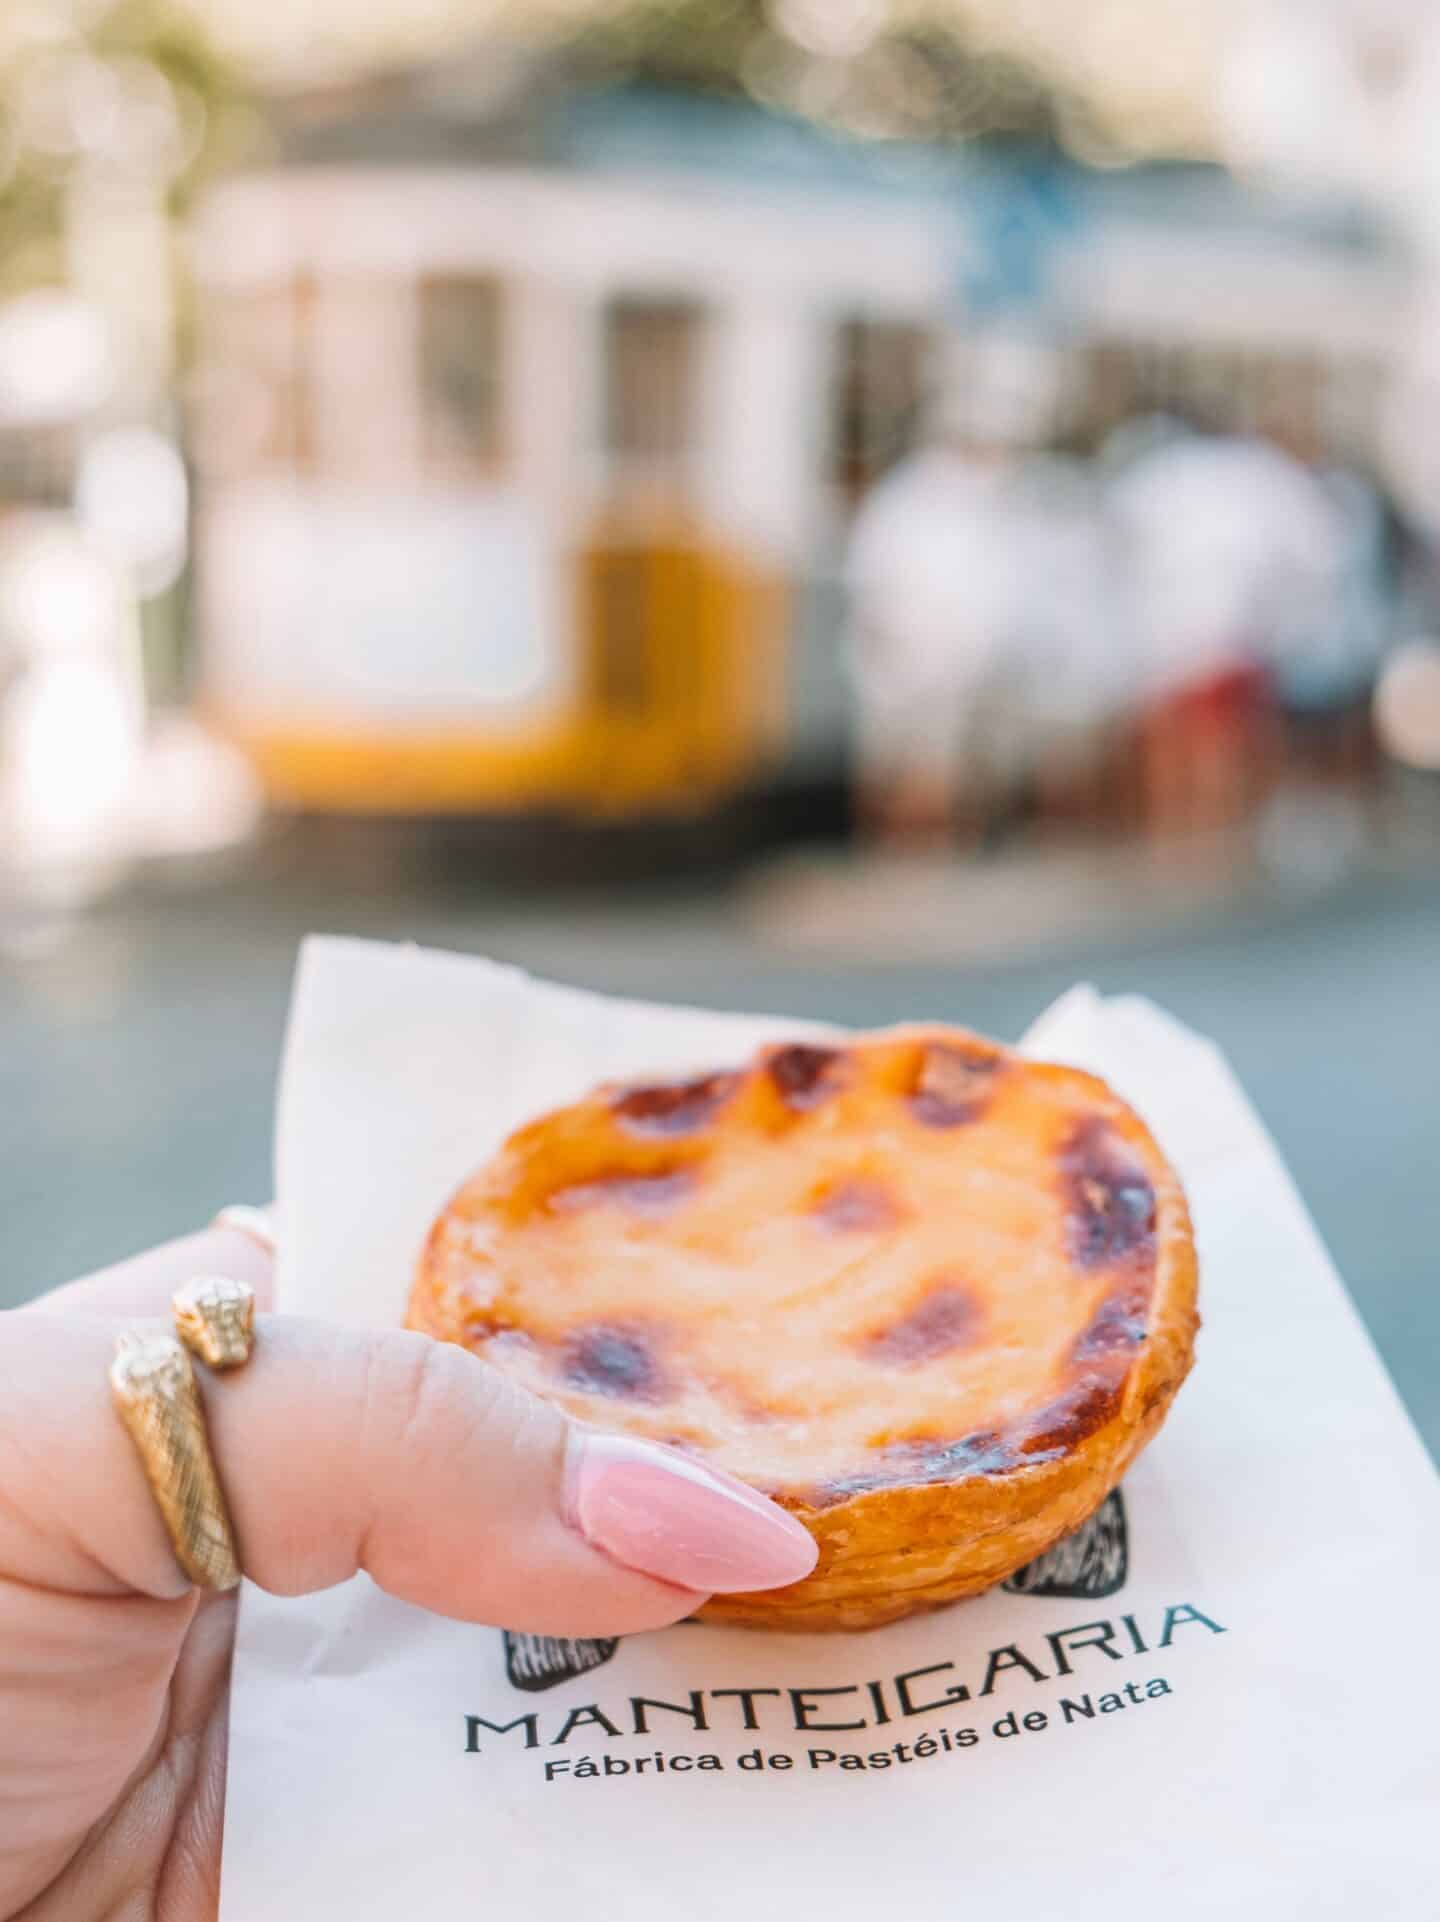 A pastel de nata from Manteigaria! Trying this pastry is a must-do during your 5 days in Lisbon. 